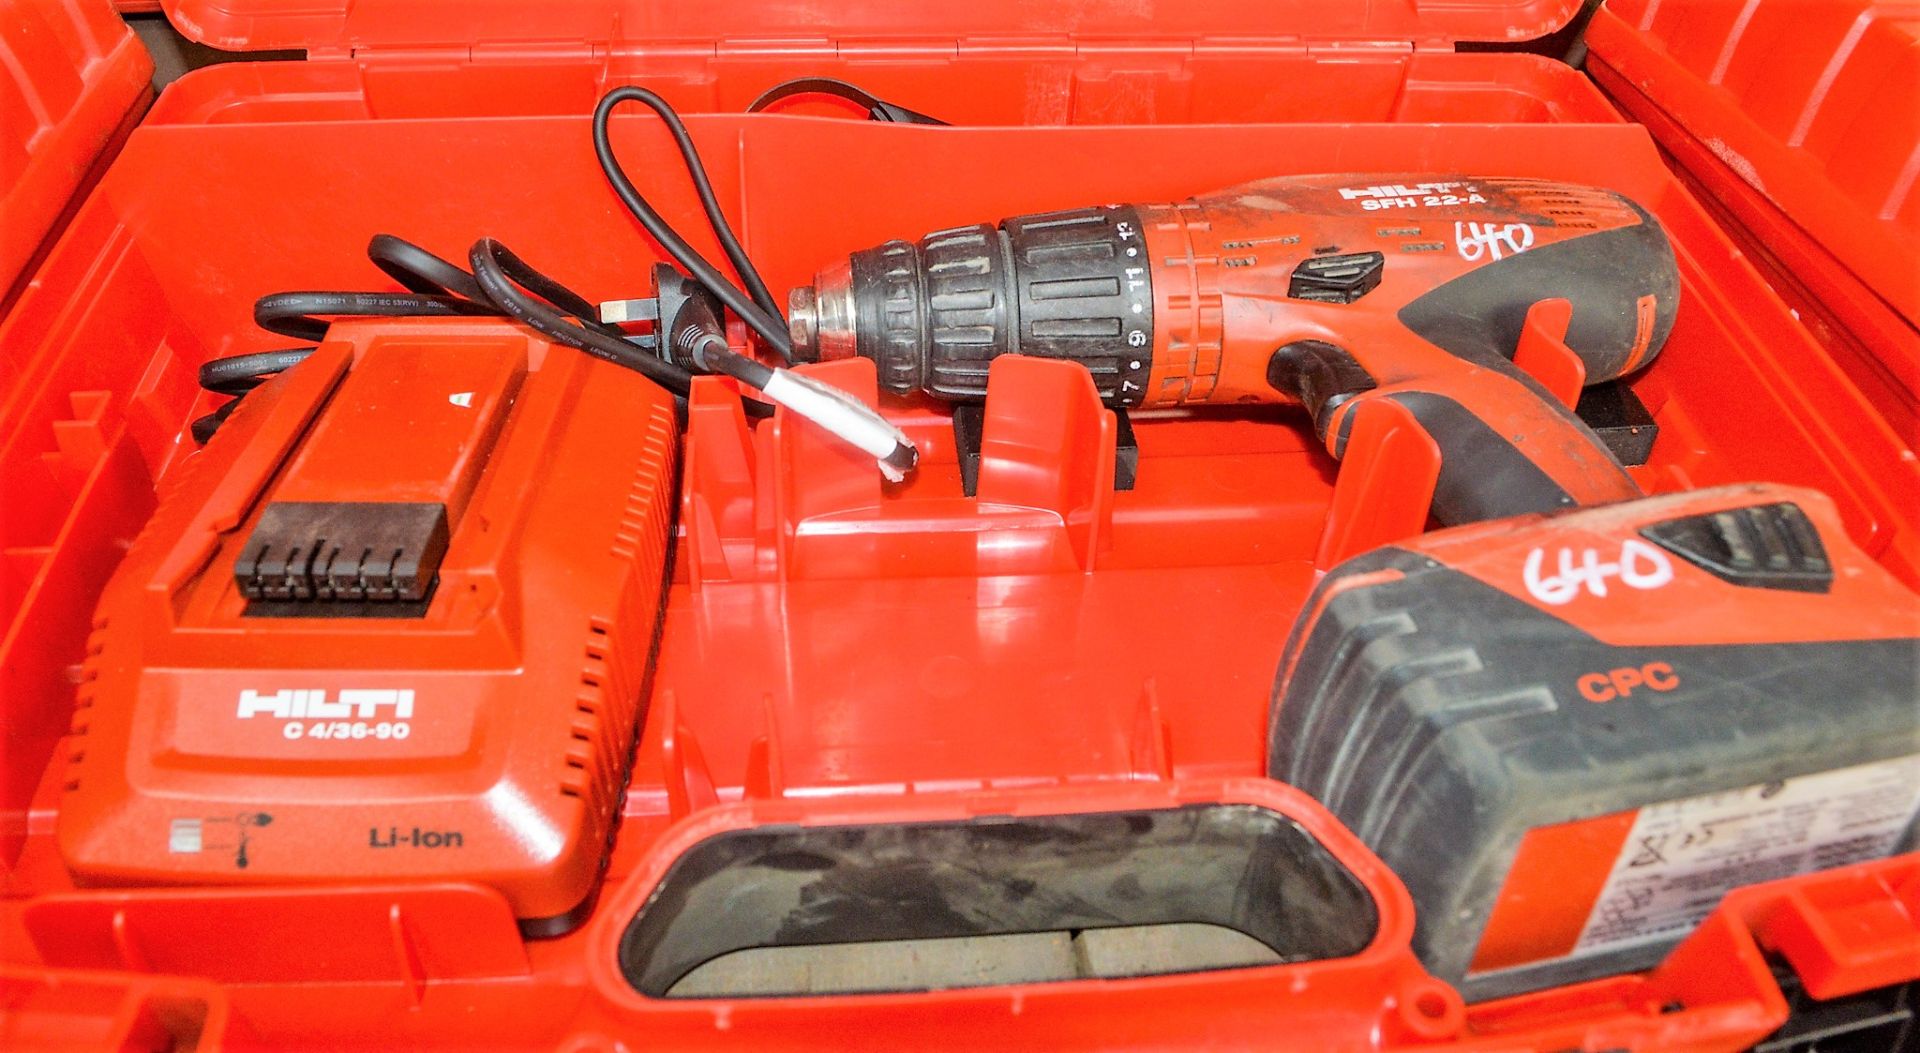 Hilti SFH22-A 22v cordless power drill c/w charger, battery & carry case A706066